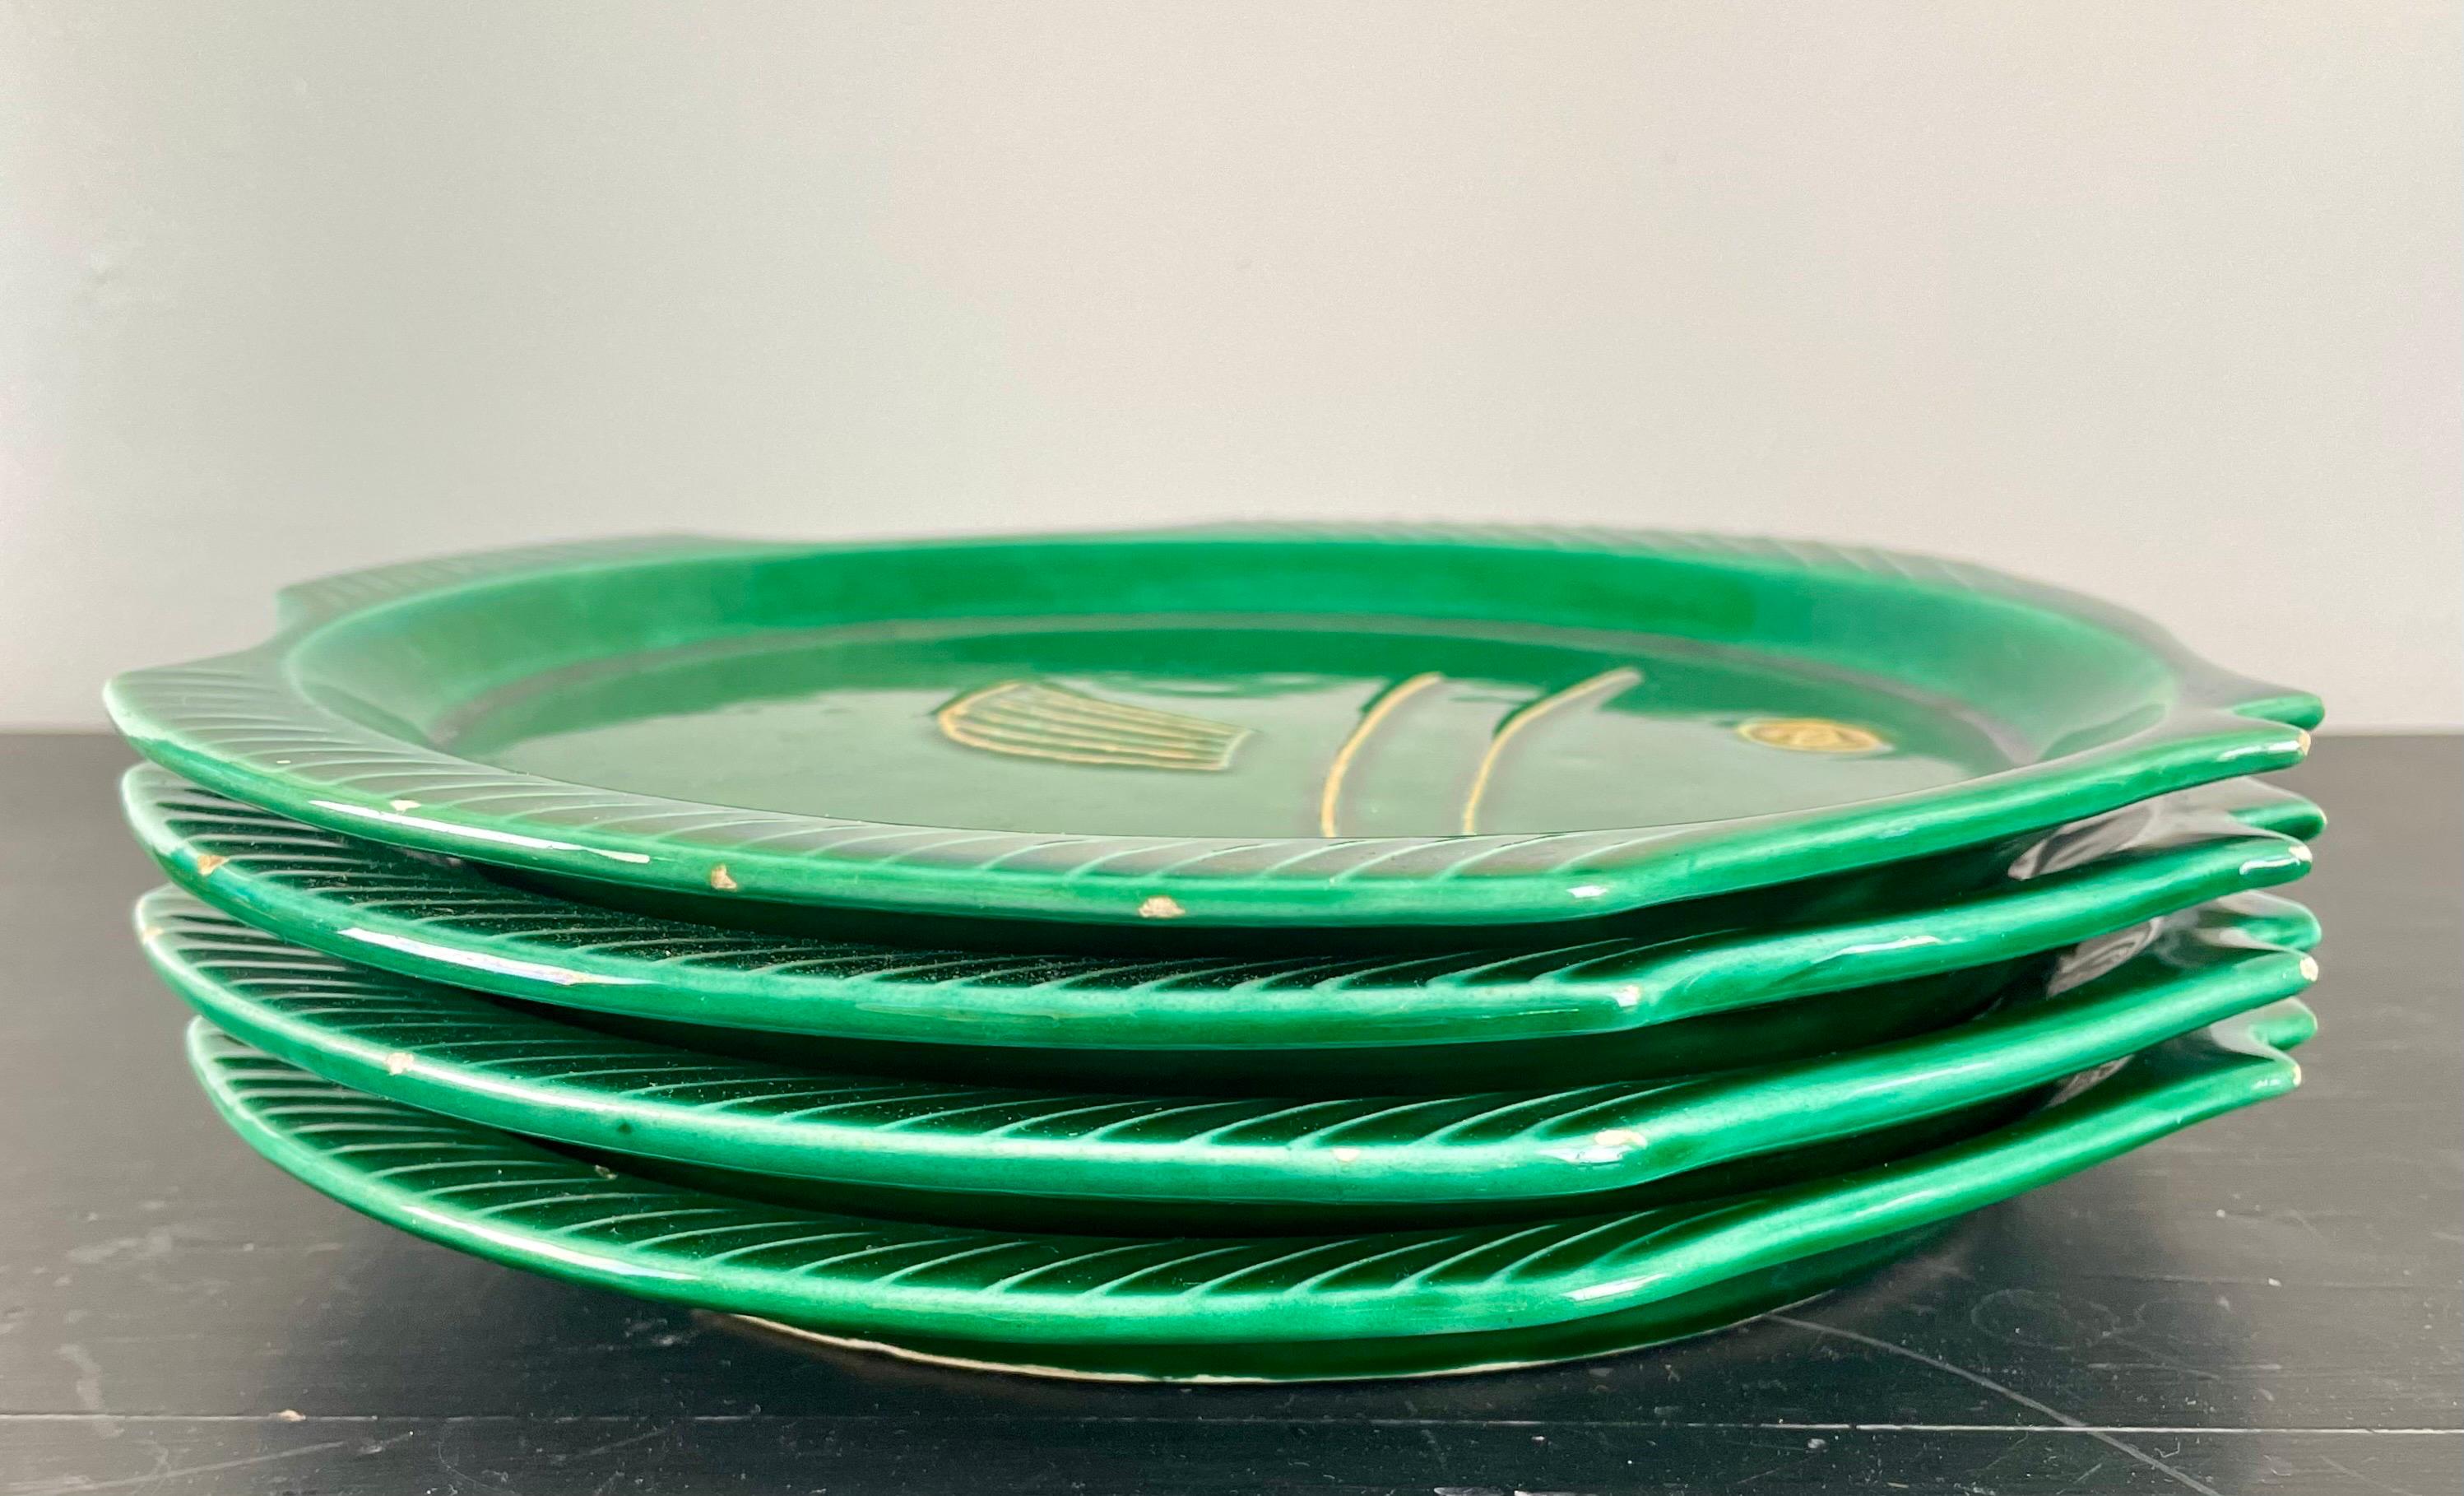 Charming green fish plates in the shape of a fish
vintage
Glazed ceramic
Made in France
Circa 1970.

Add a touch of charm and cheerfulness to your table or wall decoration with these 4 green fish-shaped plates. Made from ceramic, these plates are